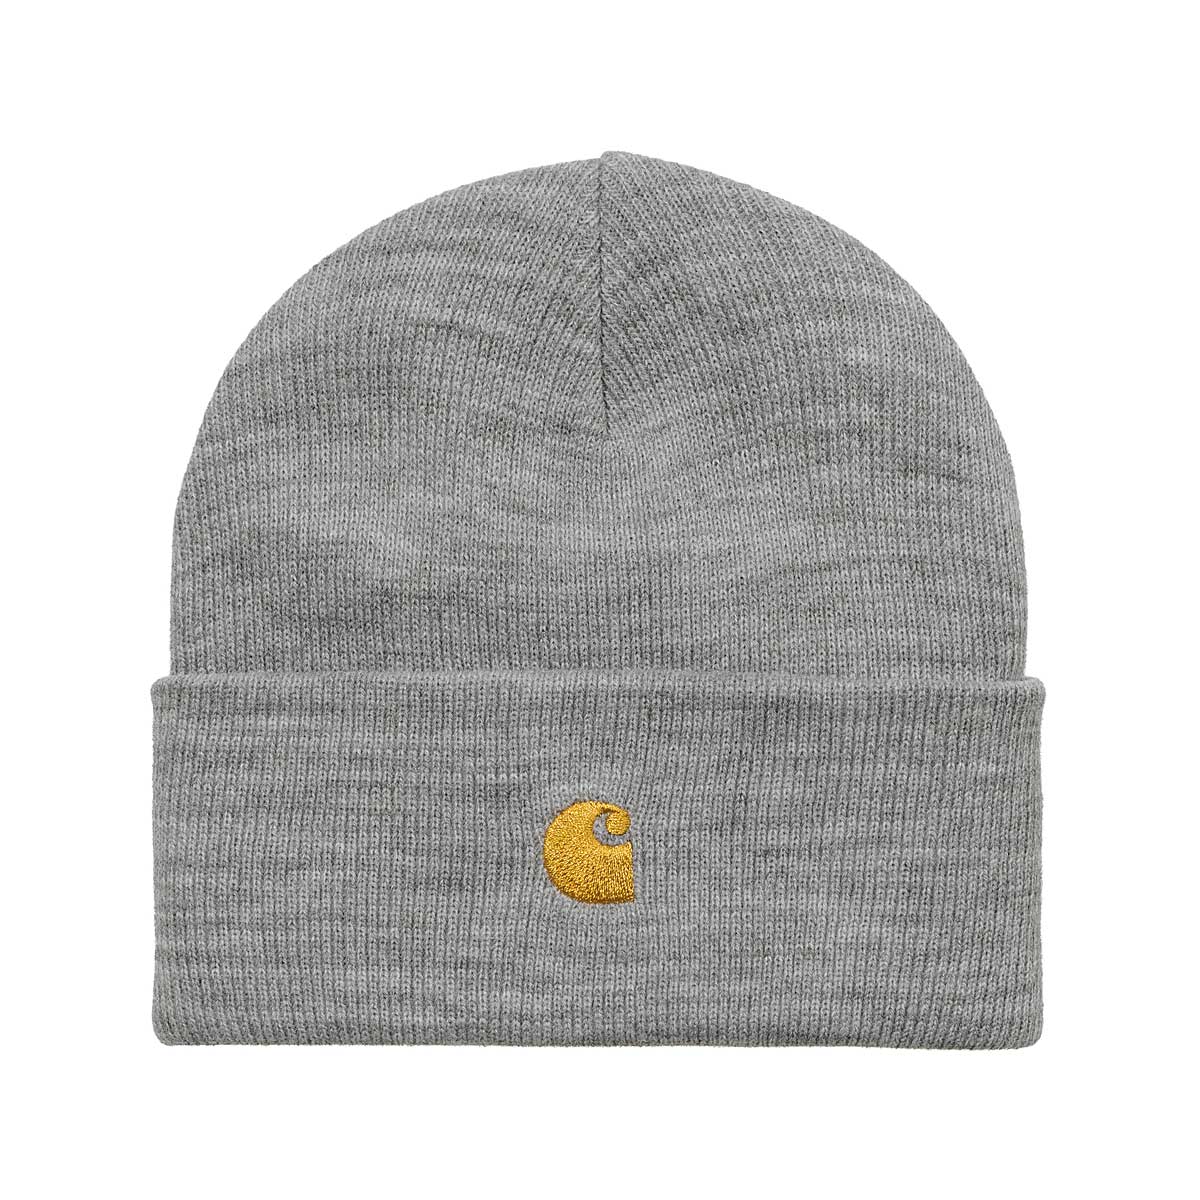 Image of Carhartt Wip Wip Chase Beanie, Grey/gold